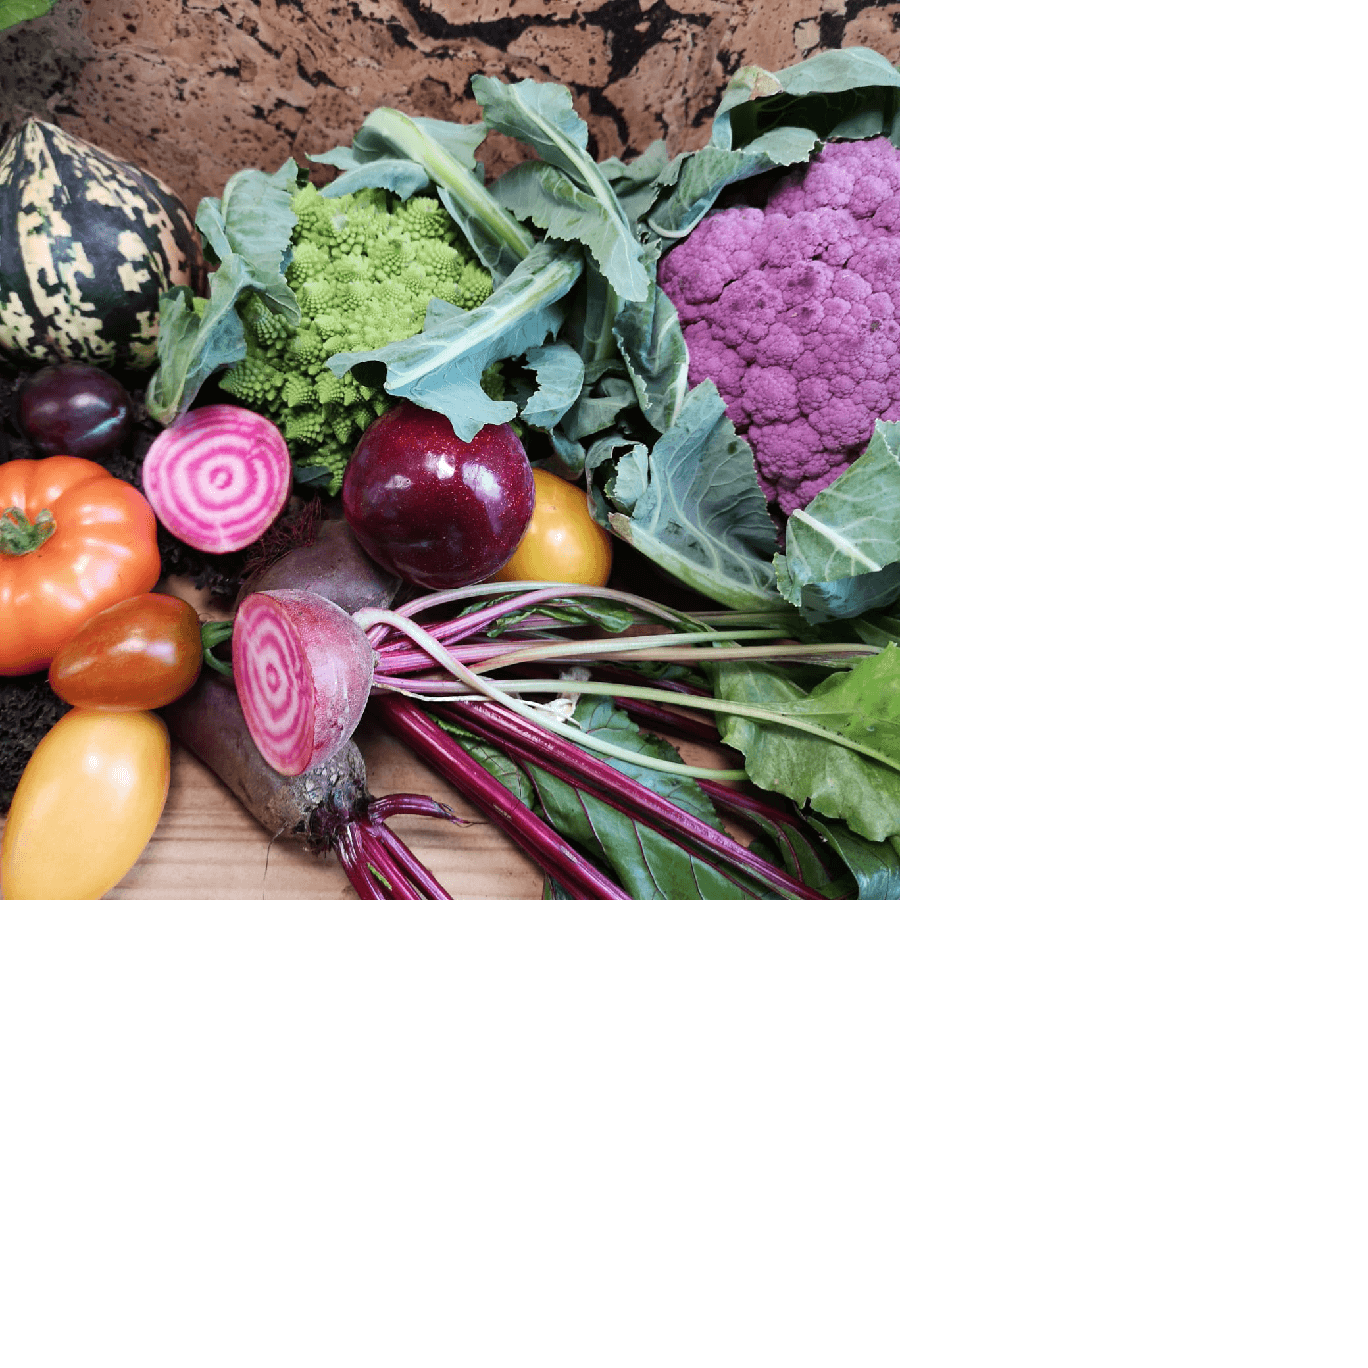 A colourful selection of healthy vegetables including peppers, beetroot, cauliflower, tomatoes, and potatoes.